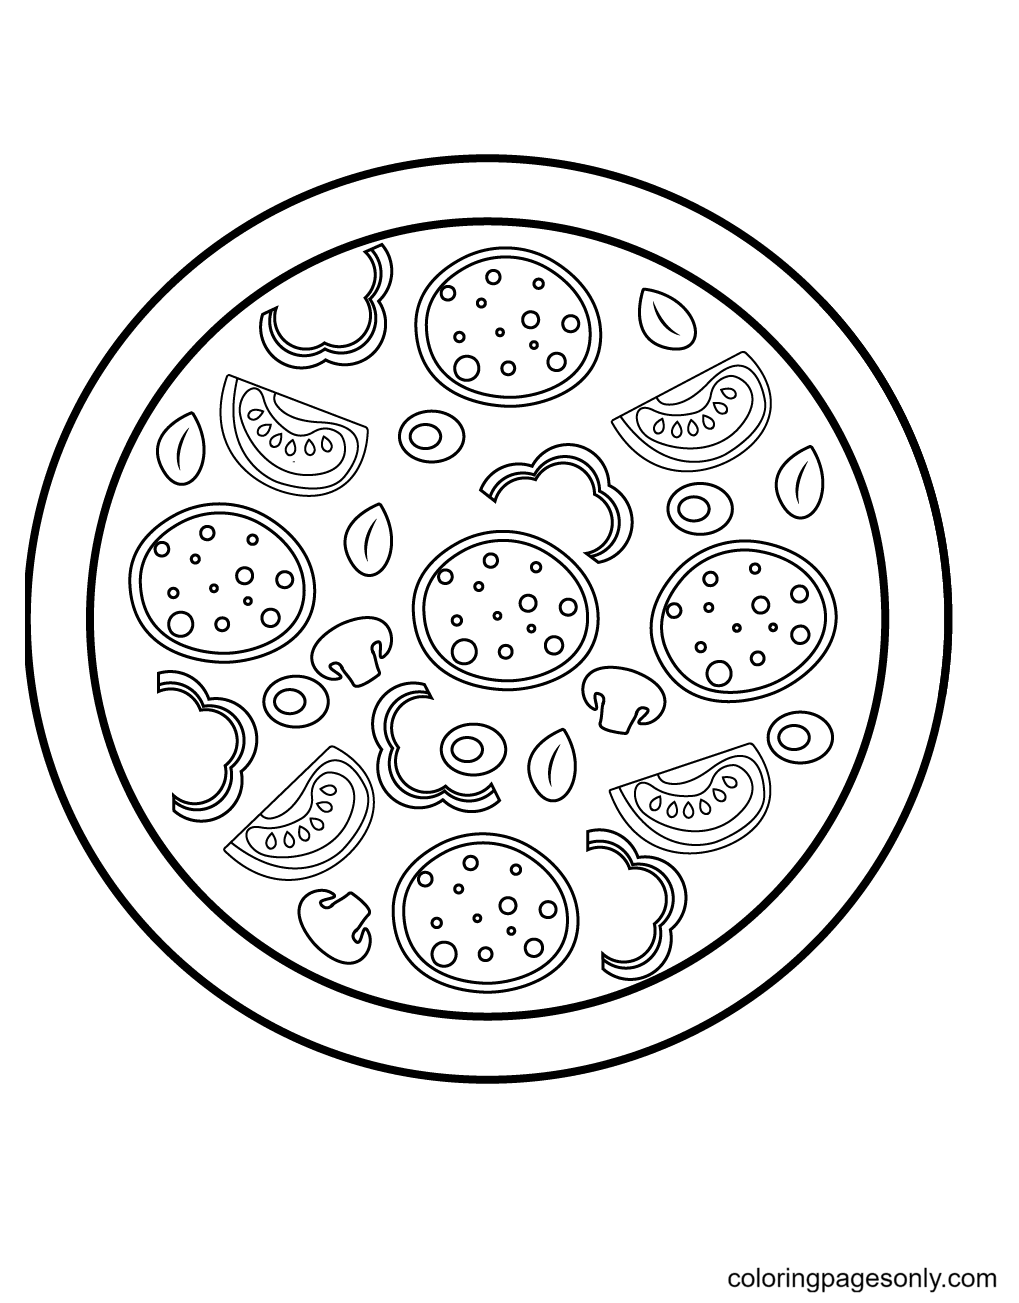 Pizza with pepperonis, tomatoes, olives, bell peppers, and mushrooms Coloring Pages